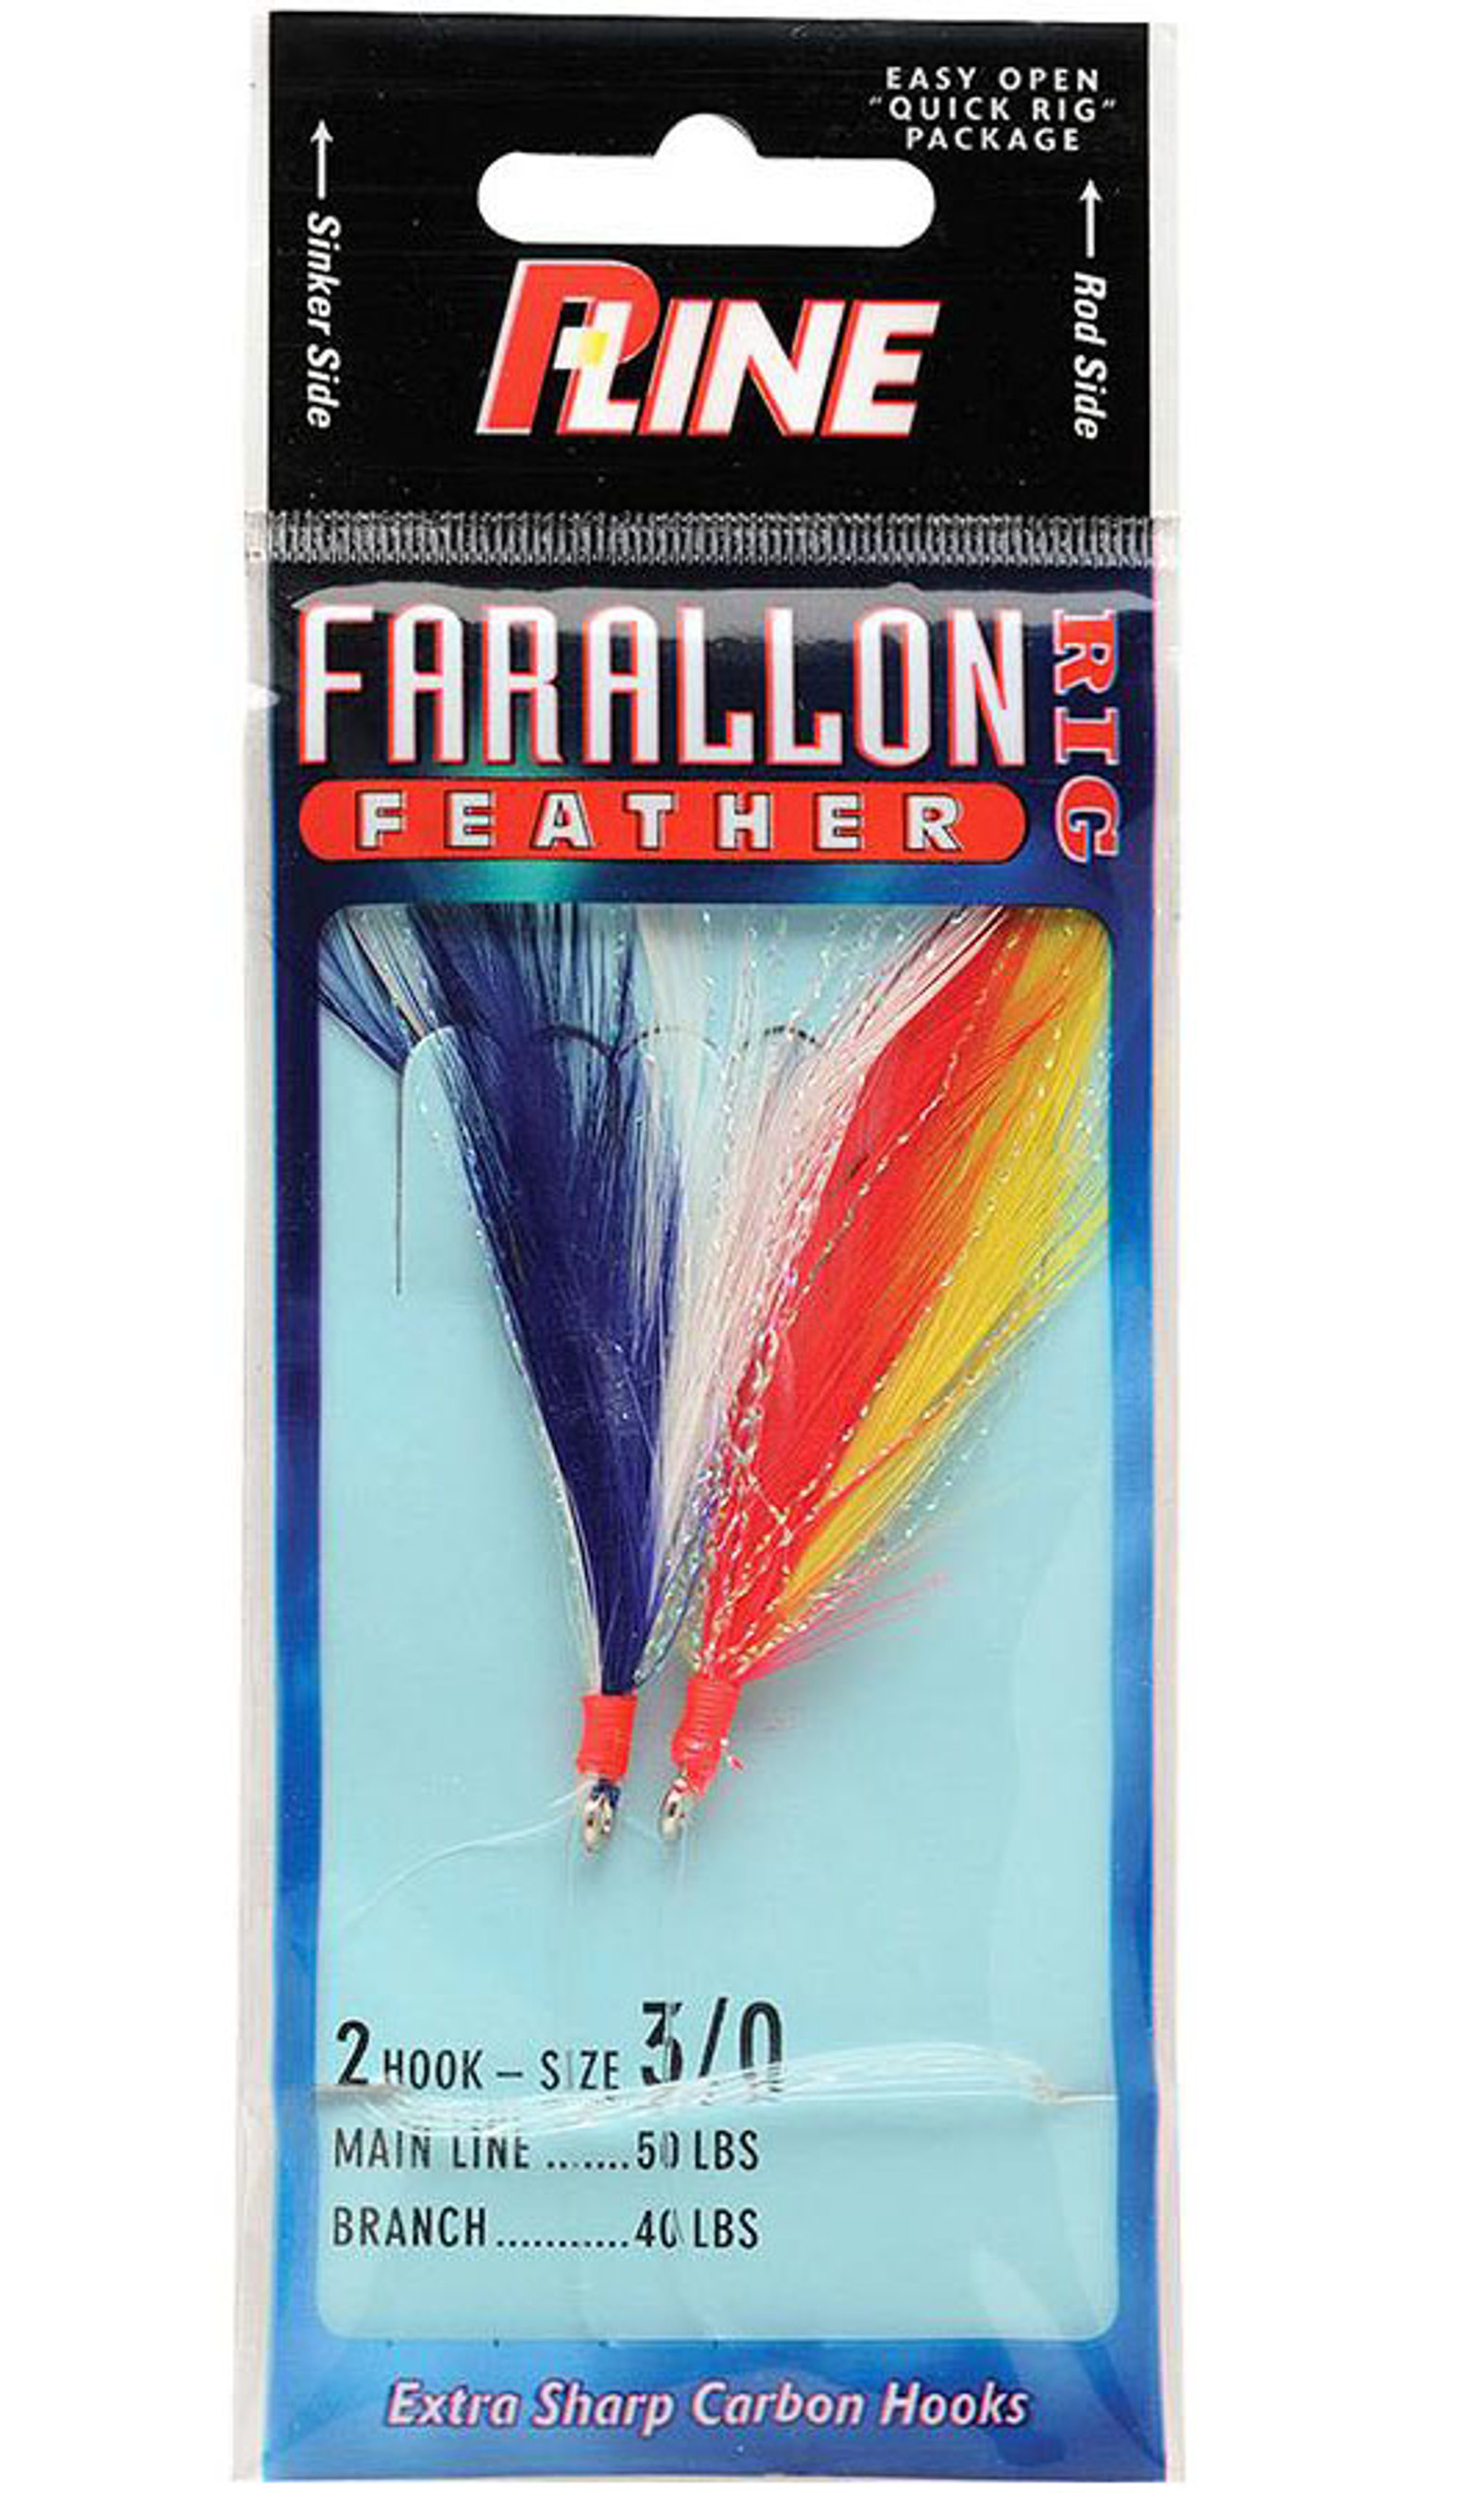 P-Line Farallon Feathers Vertical Fishing Jigs (Size: 3/0 Mix)